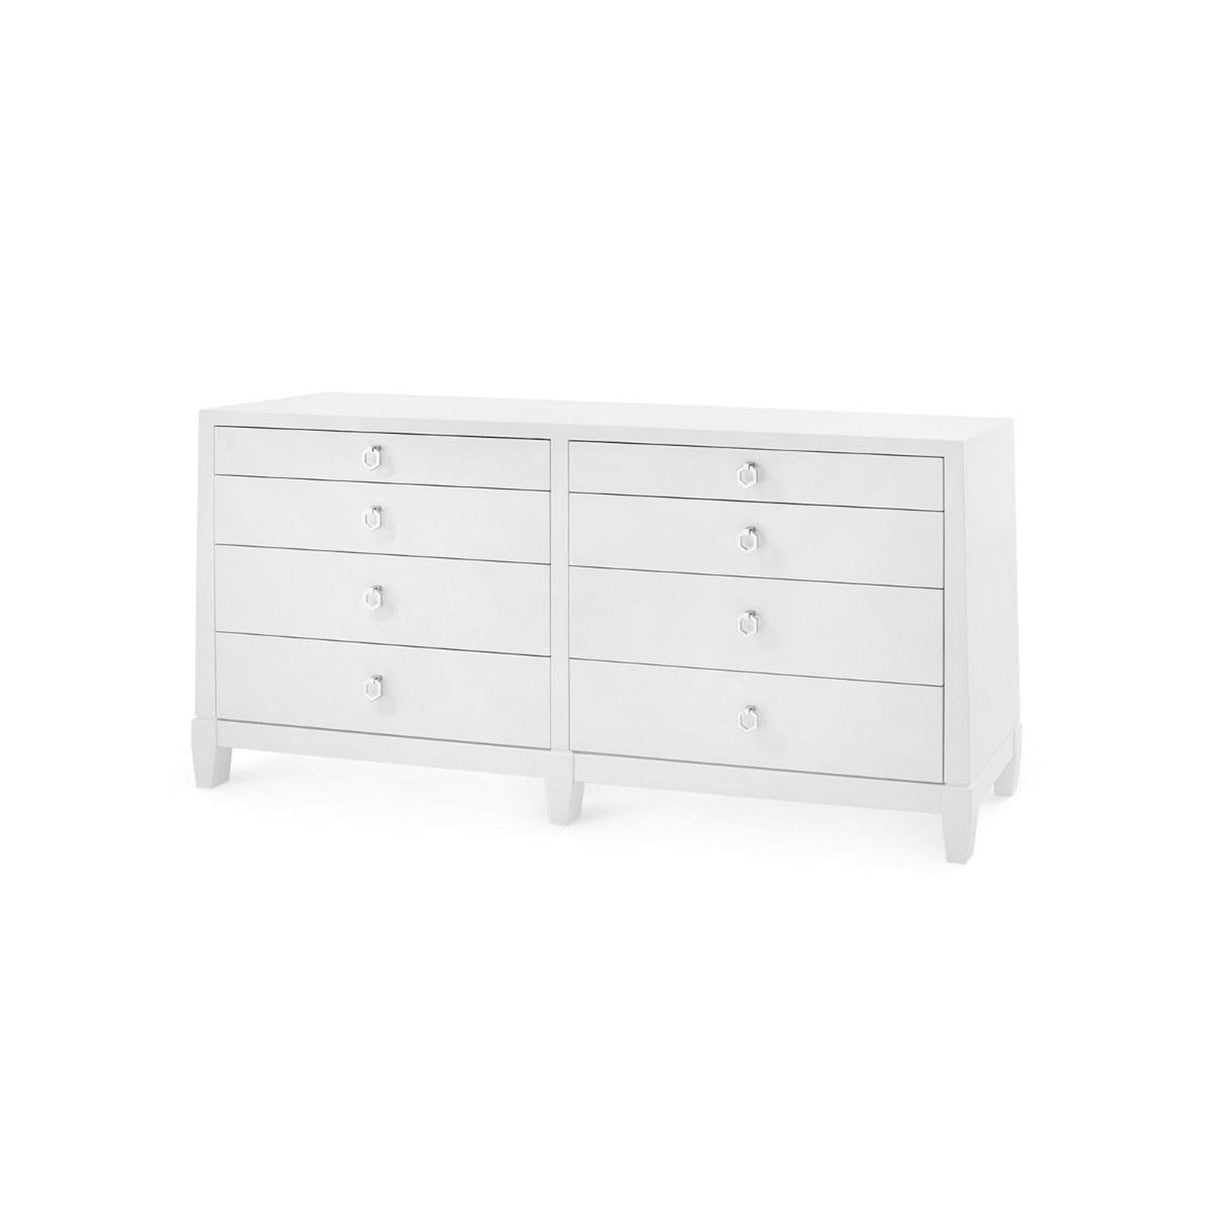 MADISON COLLECTION Dressers MDS-250-09